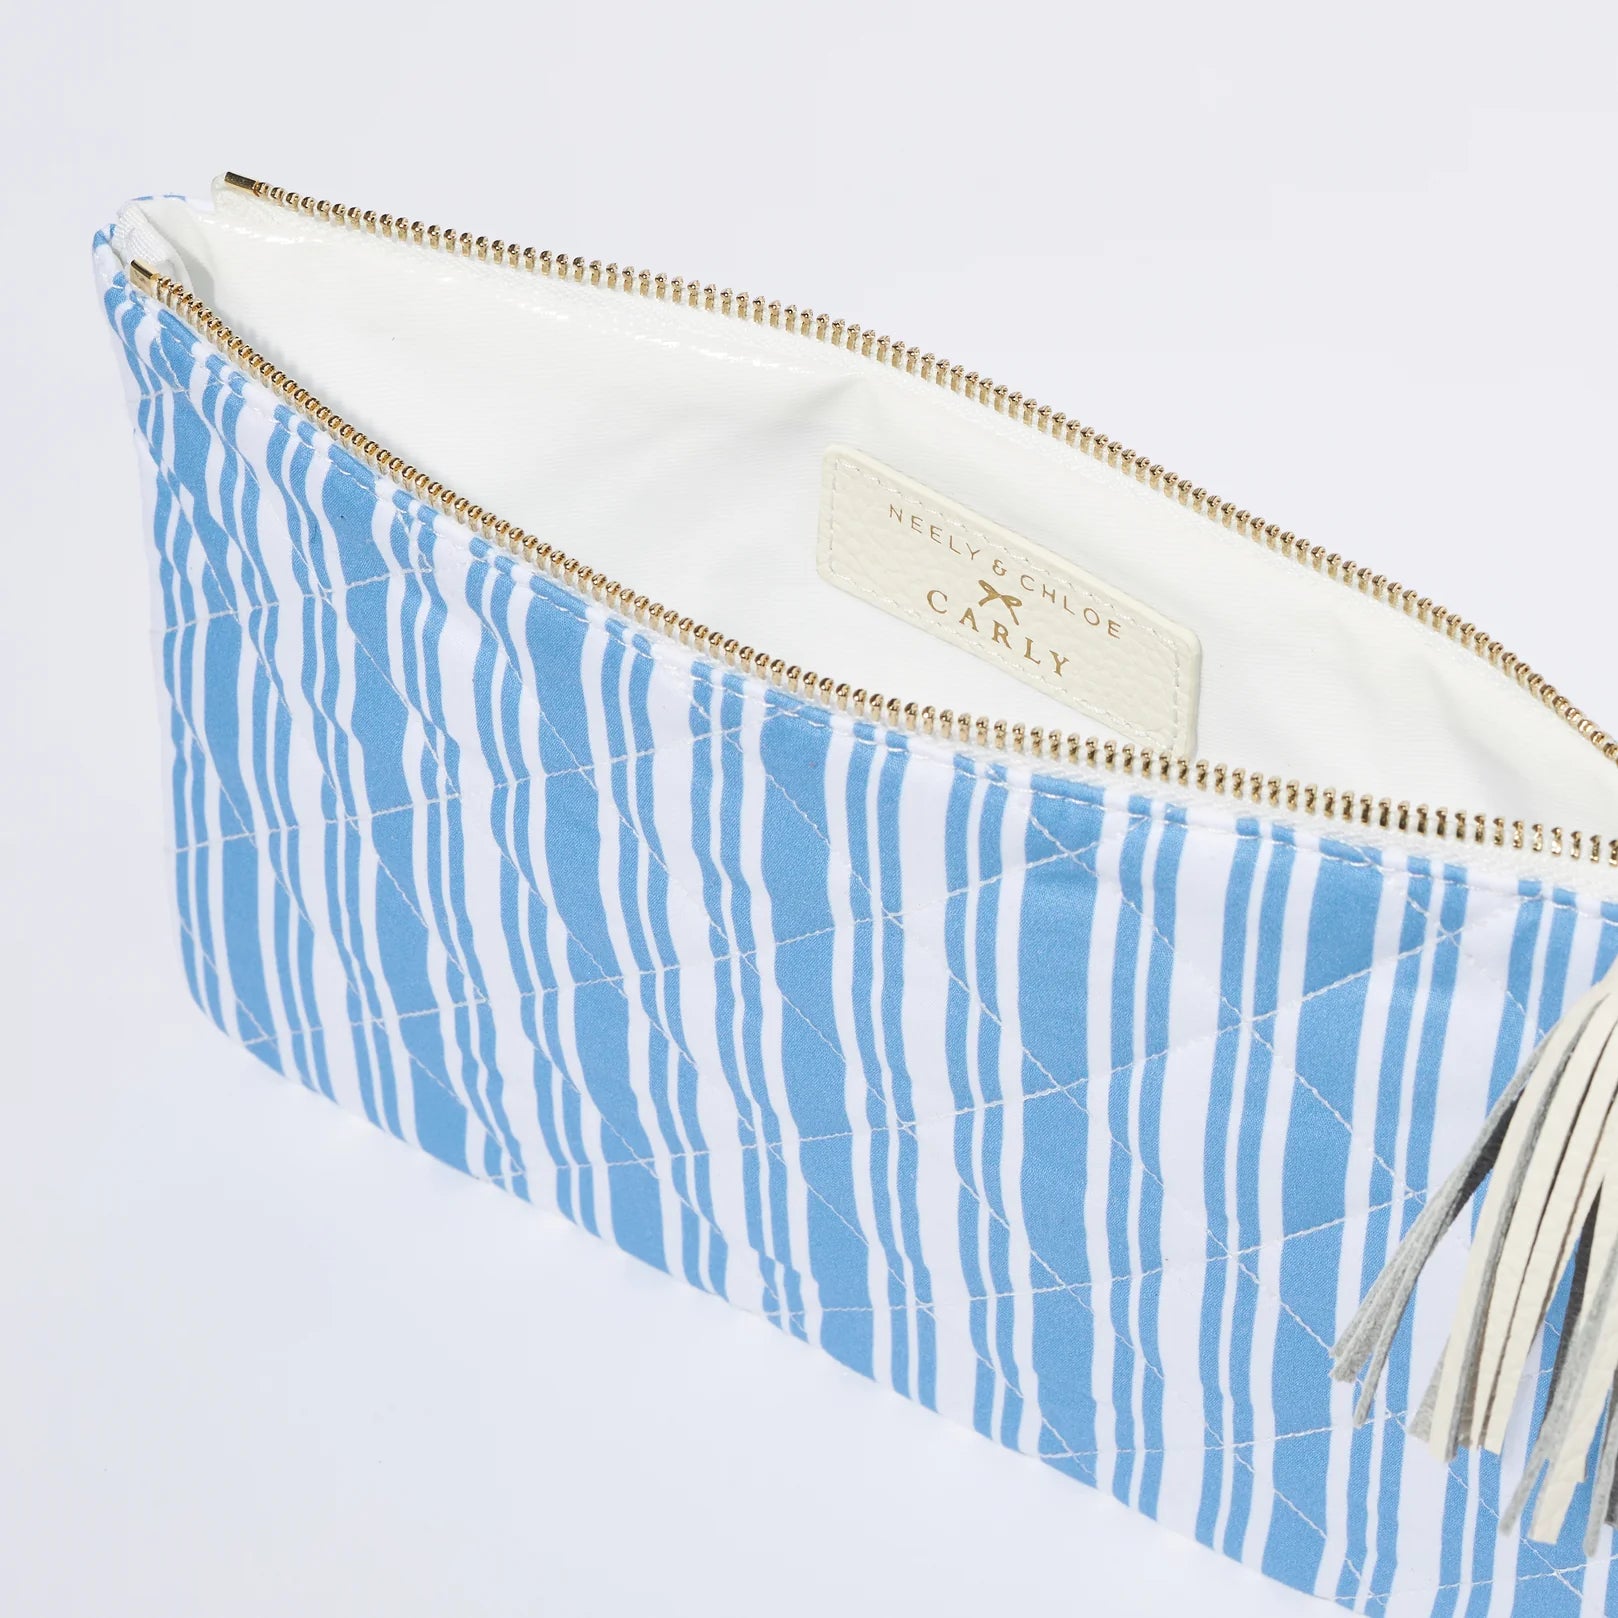 Neely & Chloe Carly Large Flat Pouch